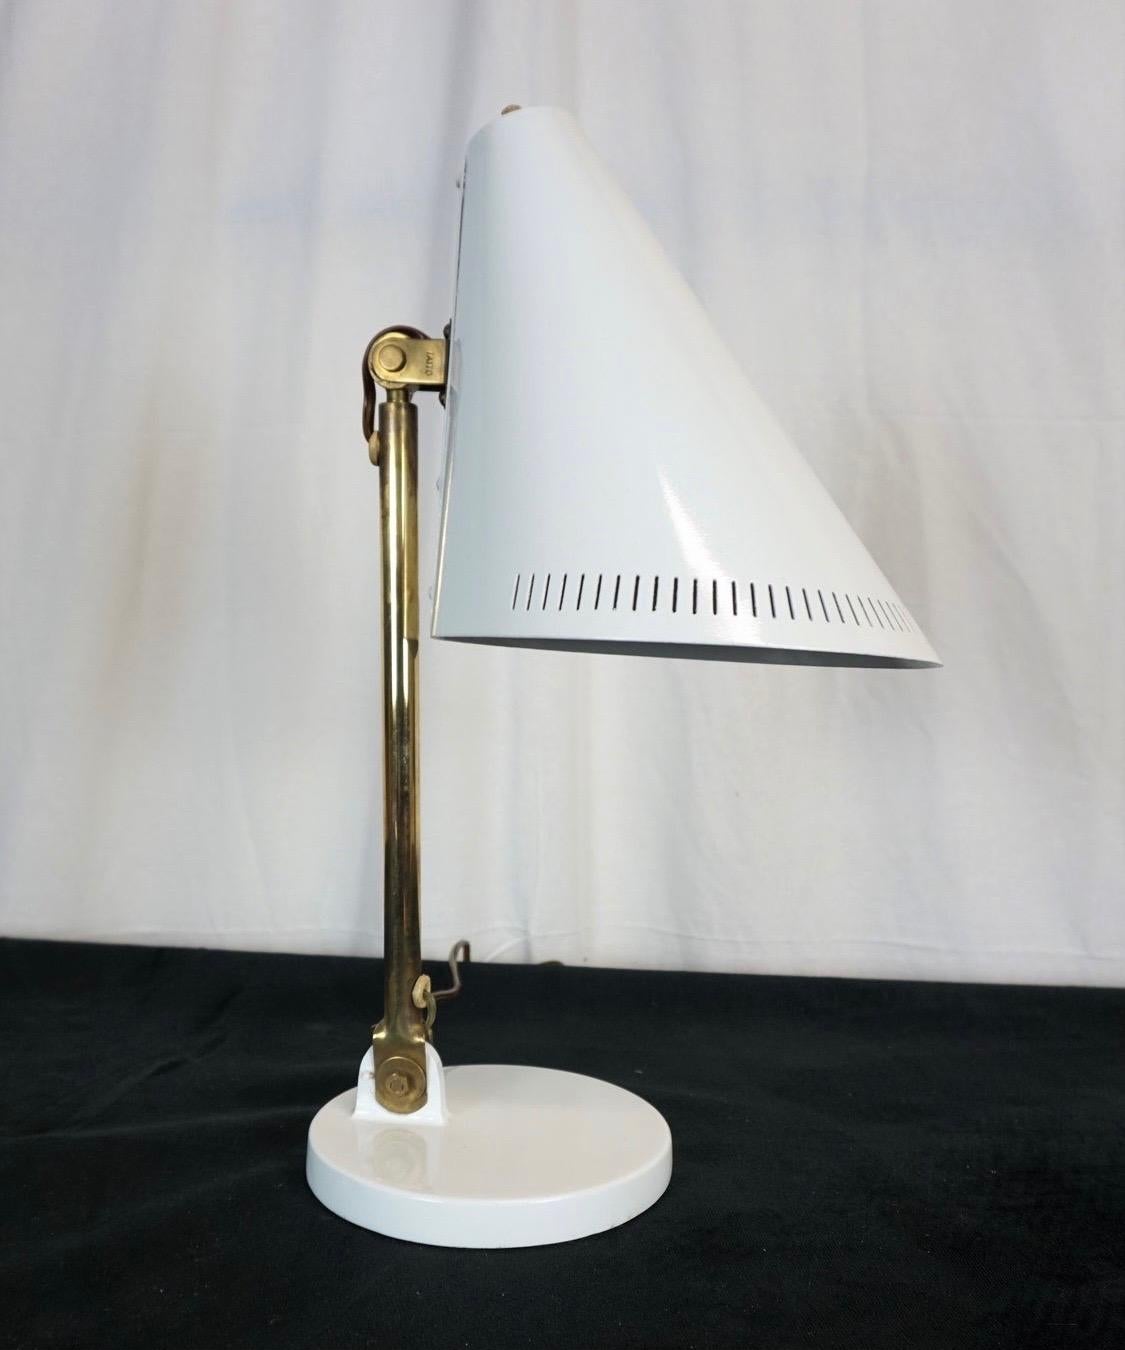 Metal Paavo Tynell Table Desk Lamp Light by Taito Oy